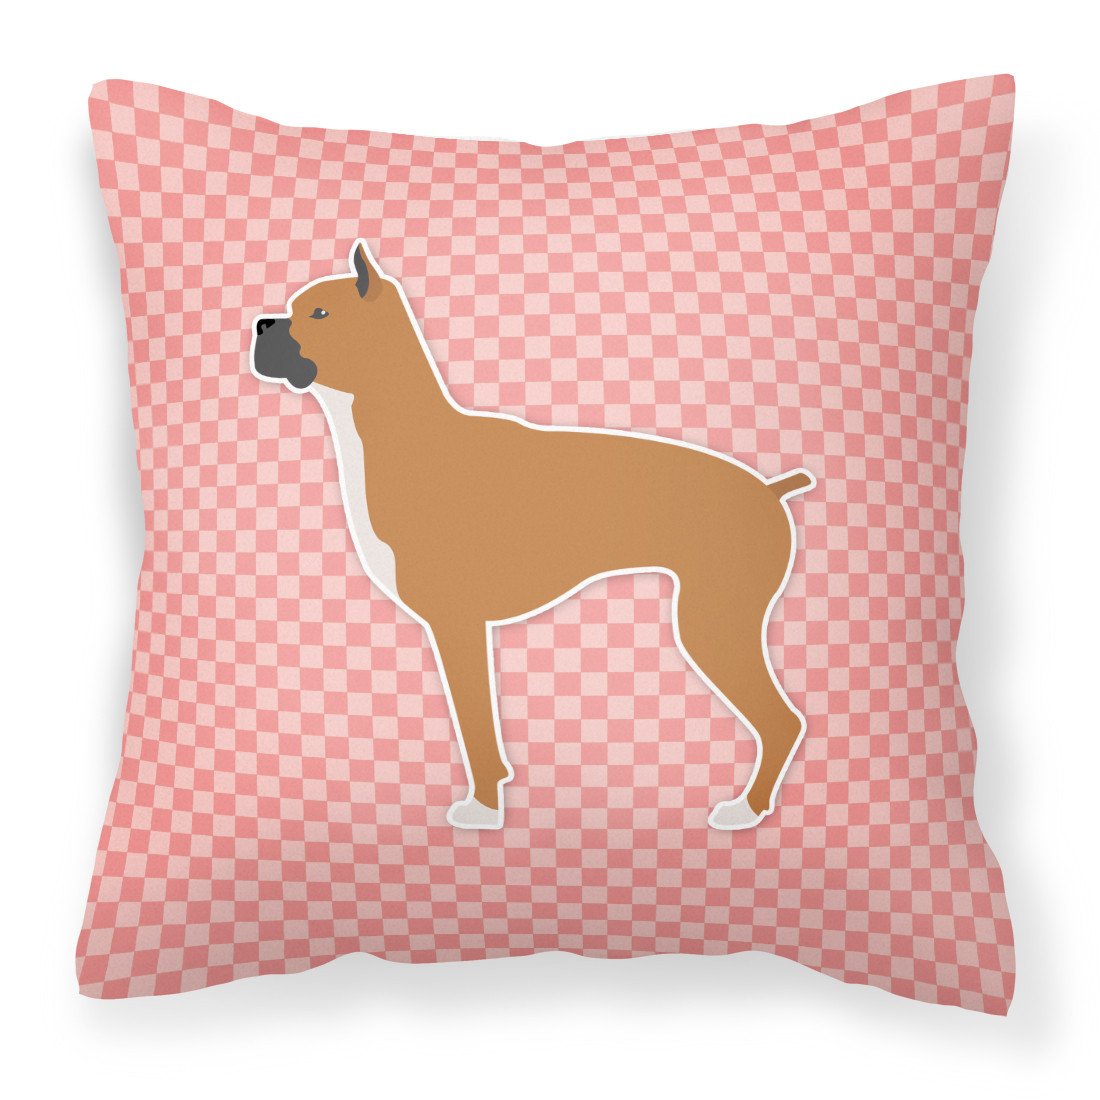 Boxer Checkerboard Pink Fabric Decorative Pillow BB3653PW1818 by Caroline's Treasures